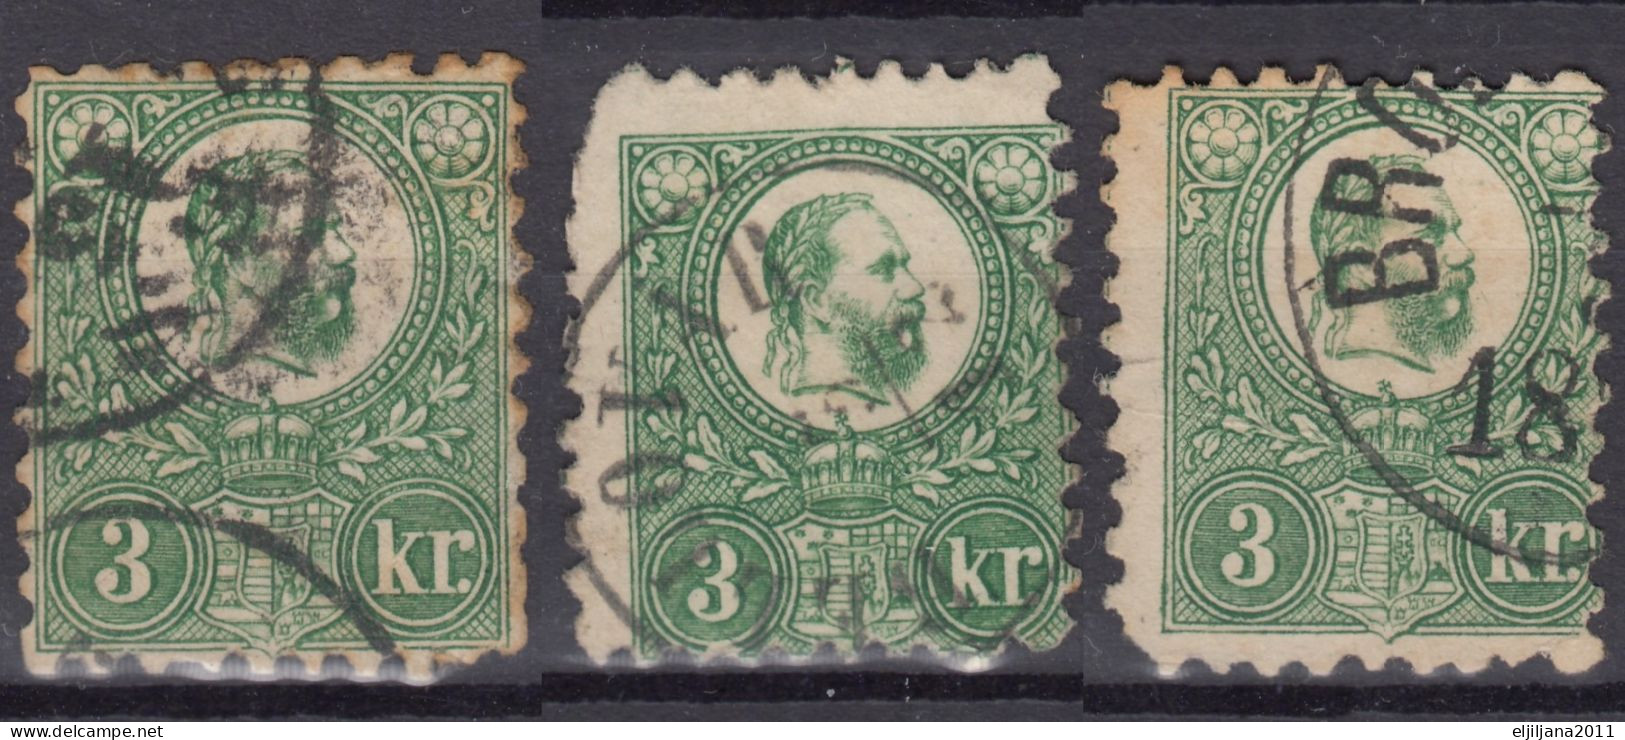 ⁕ Hungary 1871 ⁕ Franz Josef 3 Kr. ⁕ 3v used / canceled (unchecked) see scan